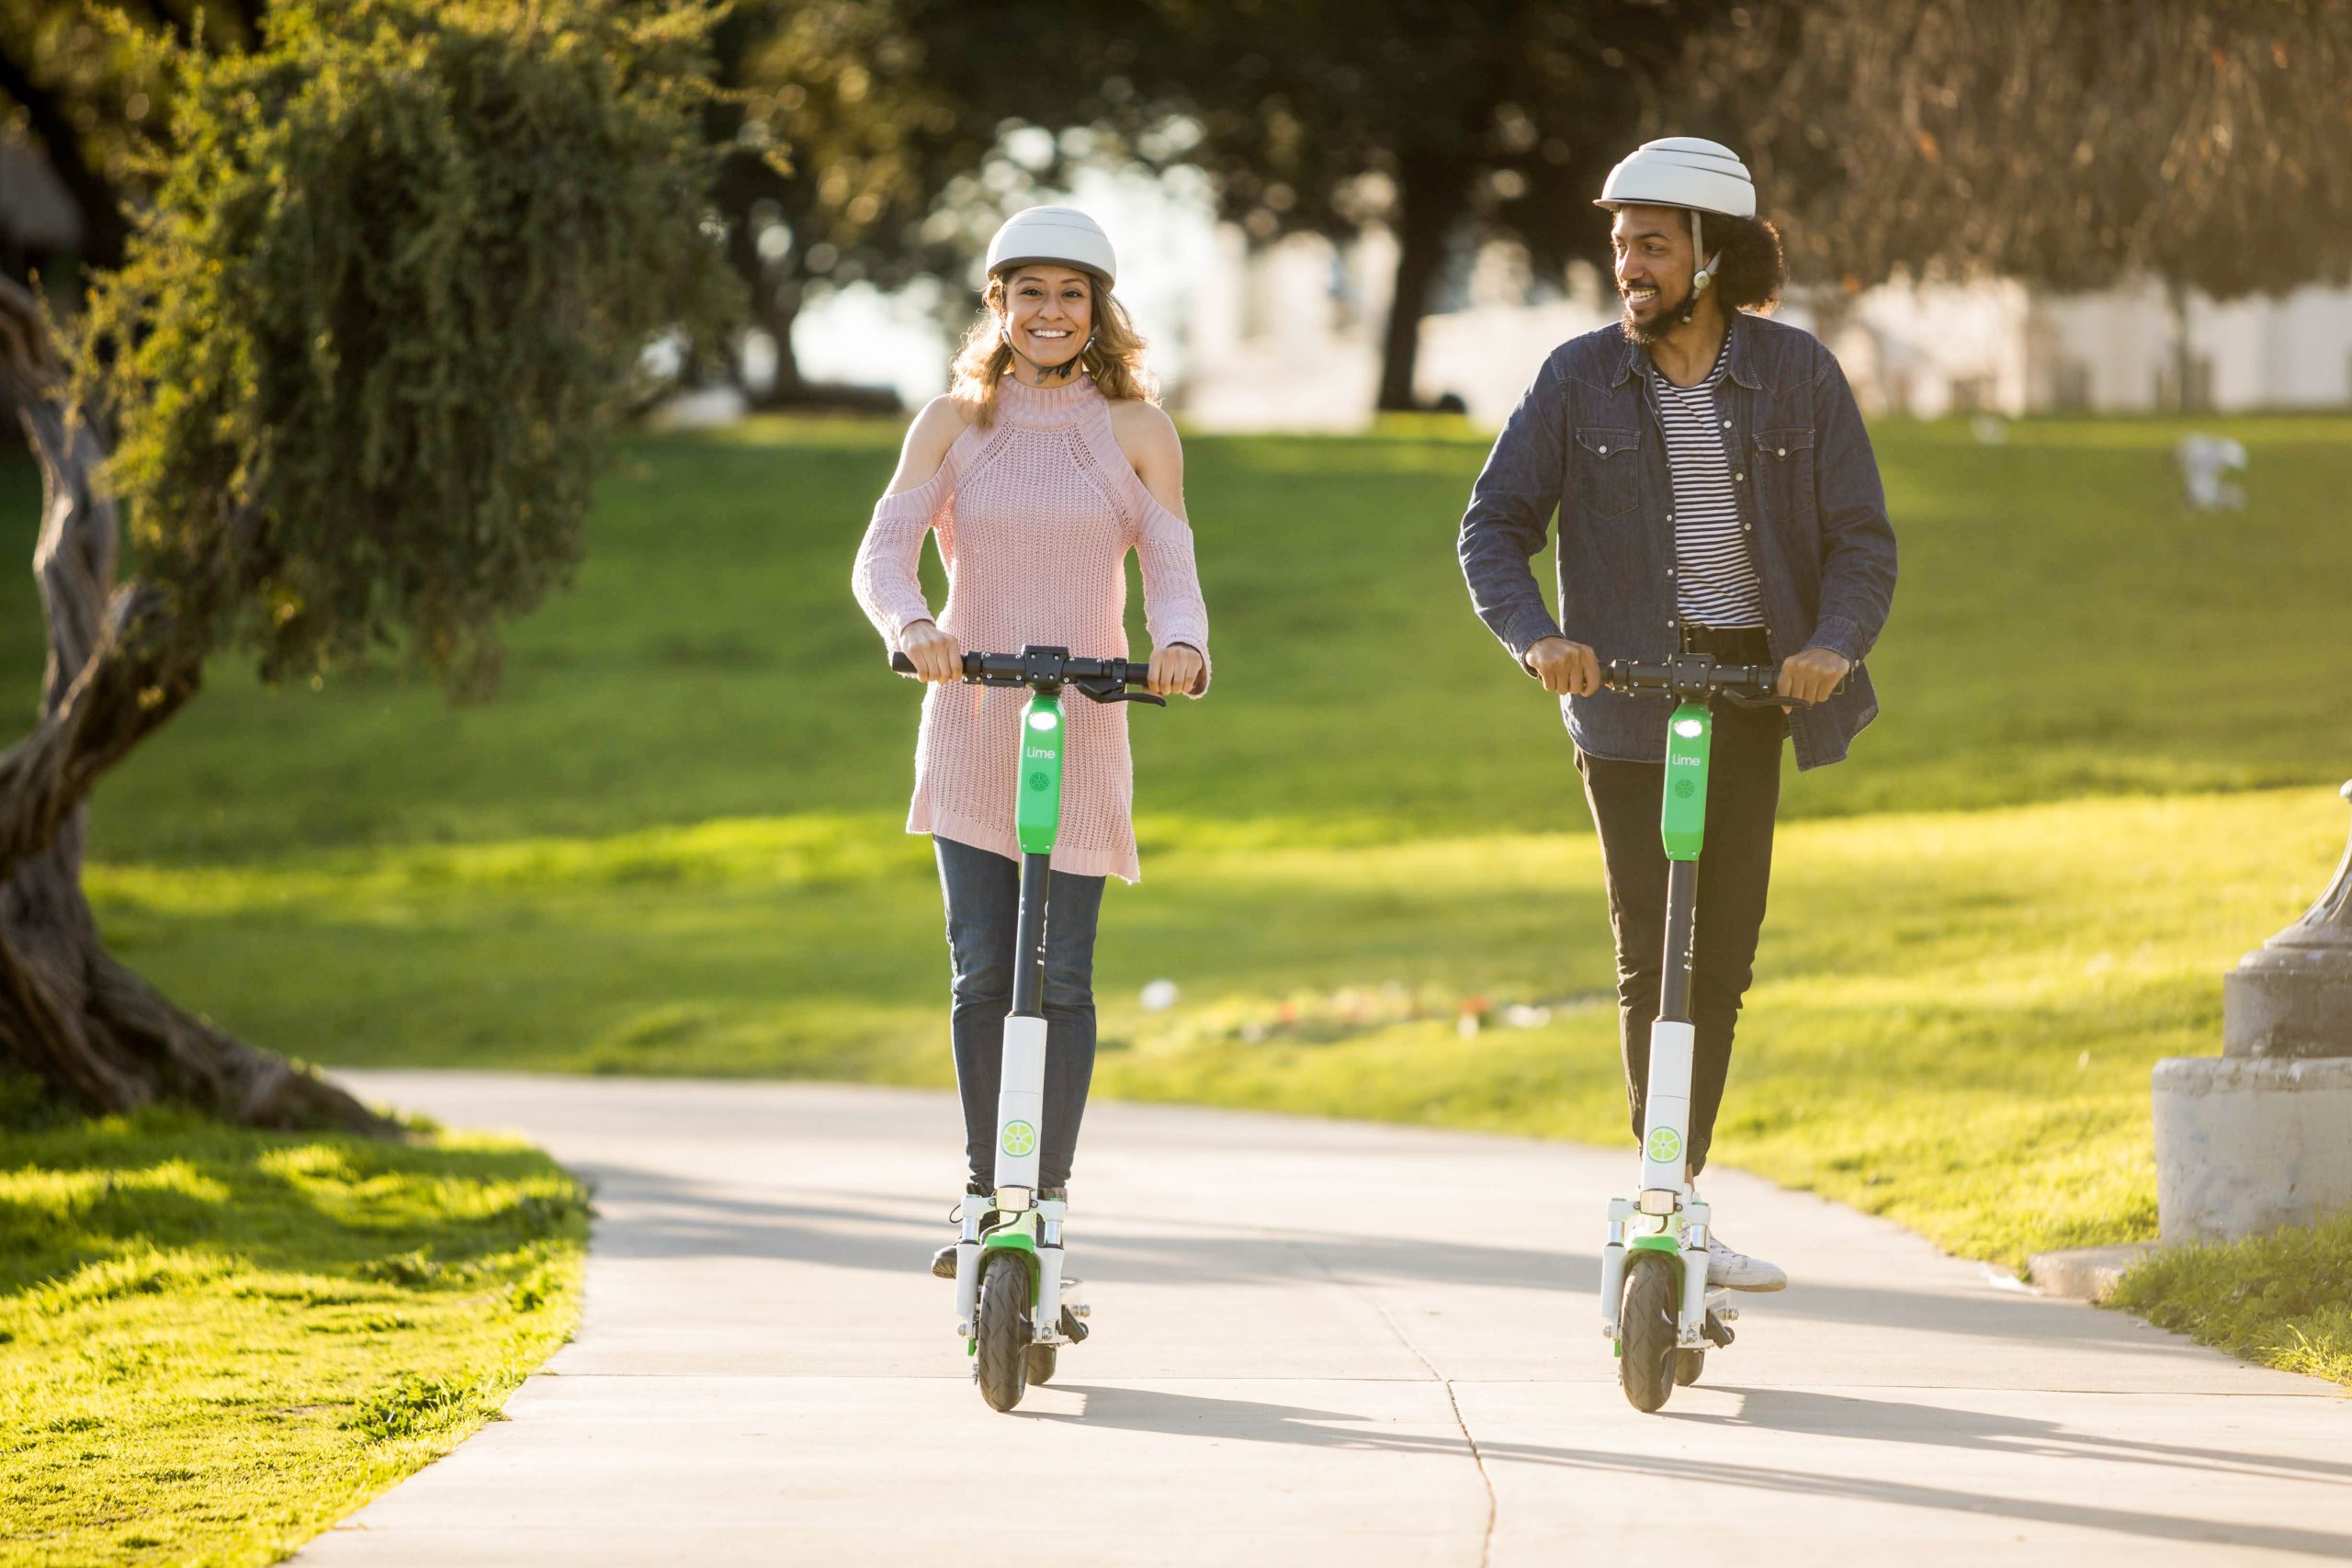 Lime offers festive gift-swap scheme for private e-scooters